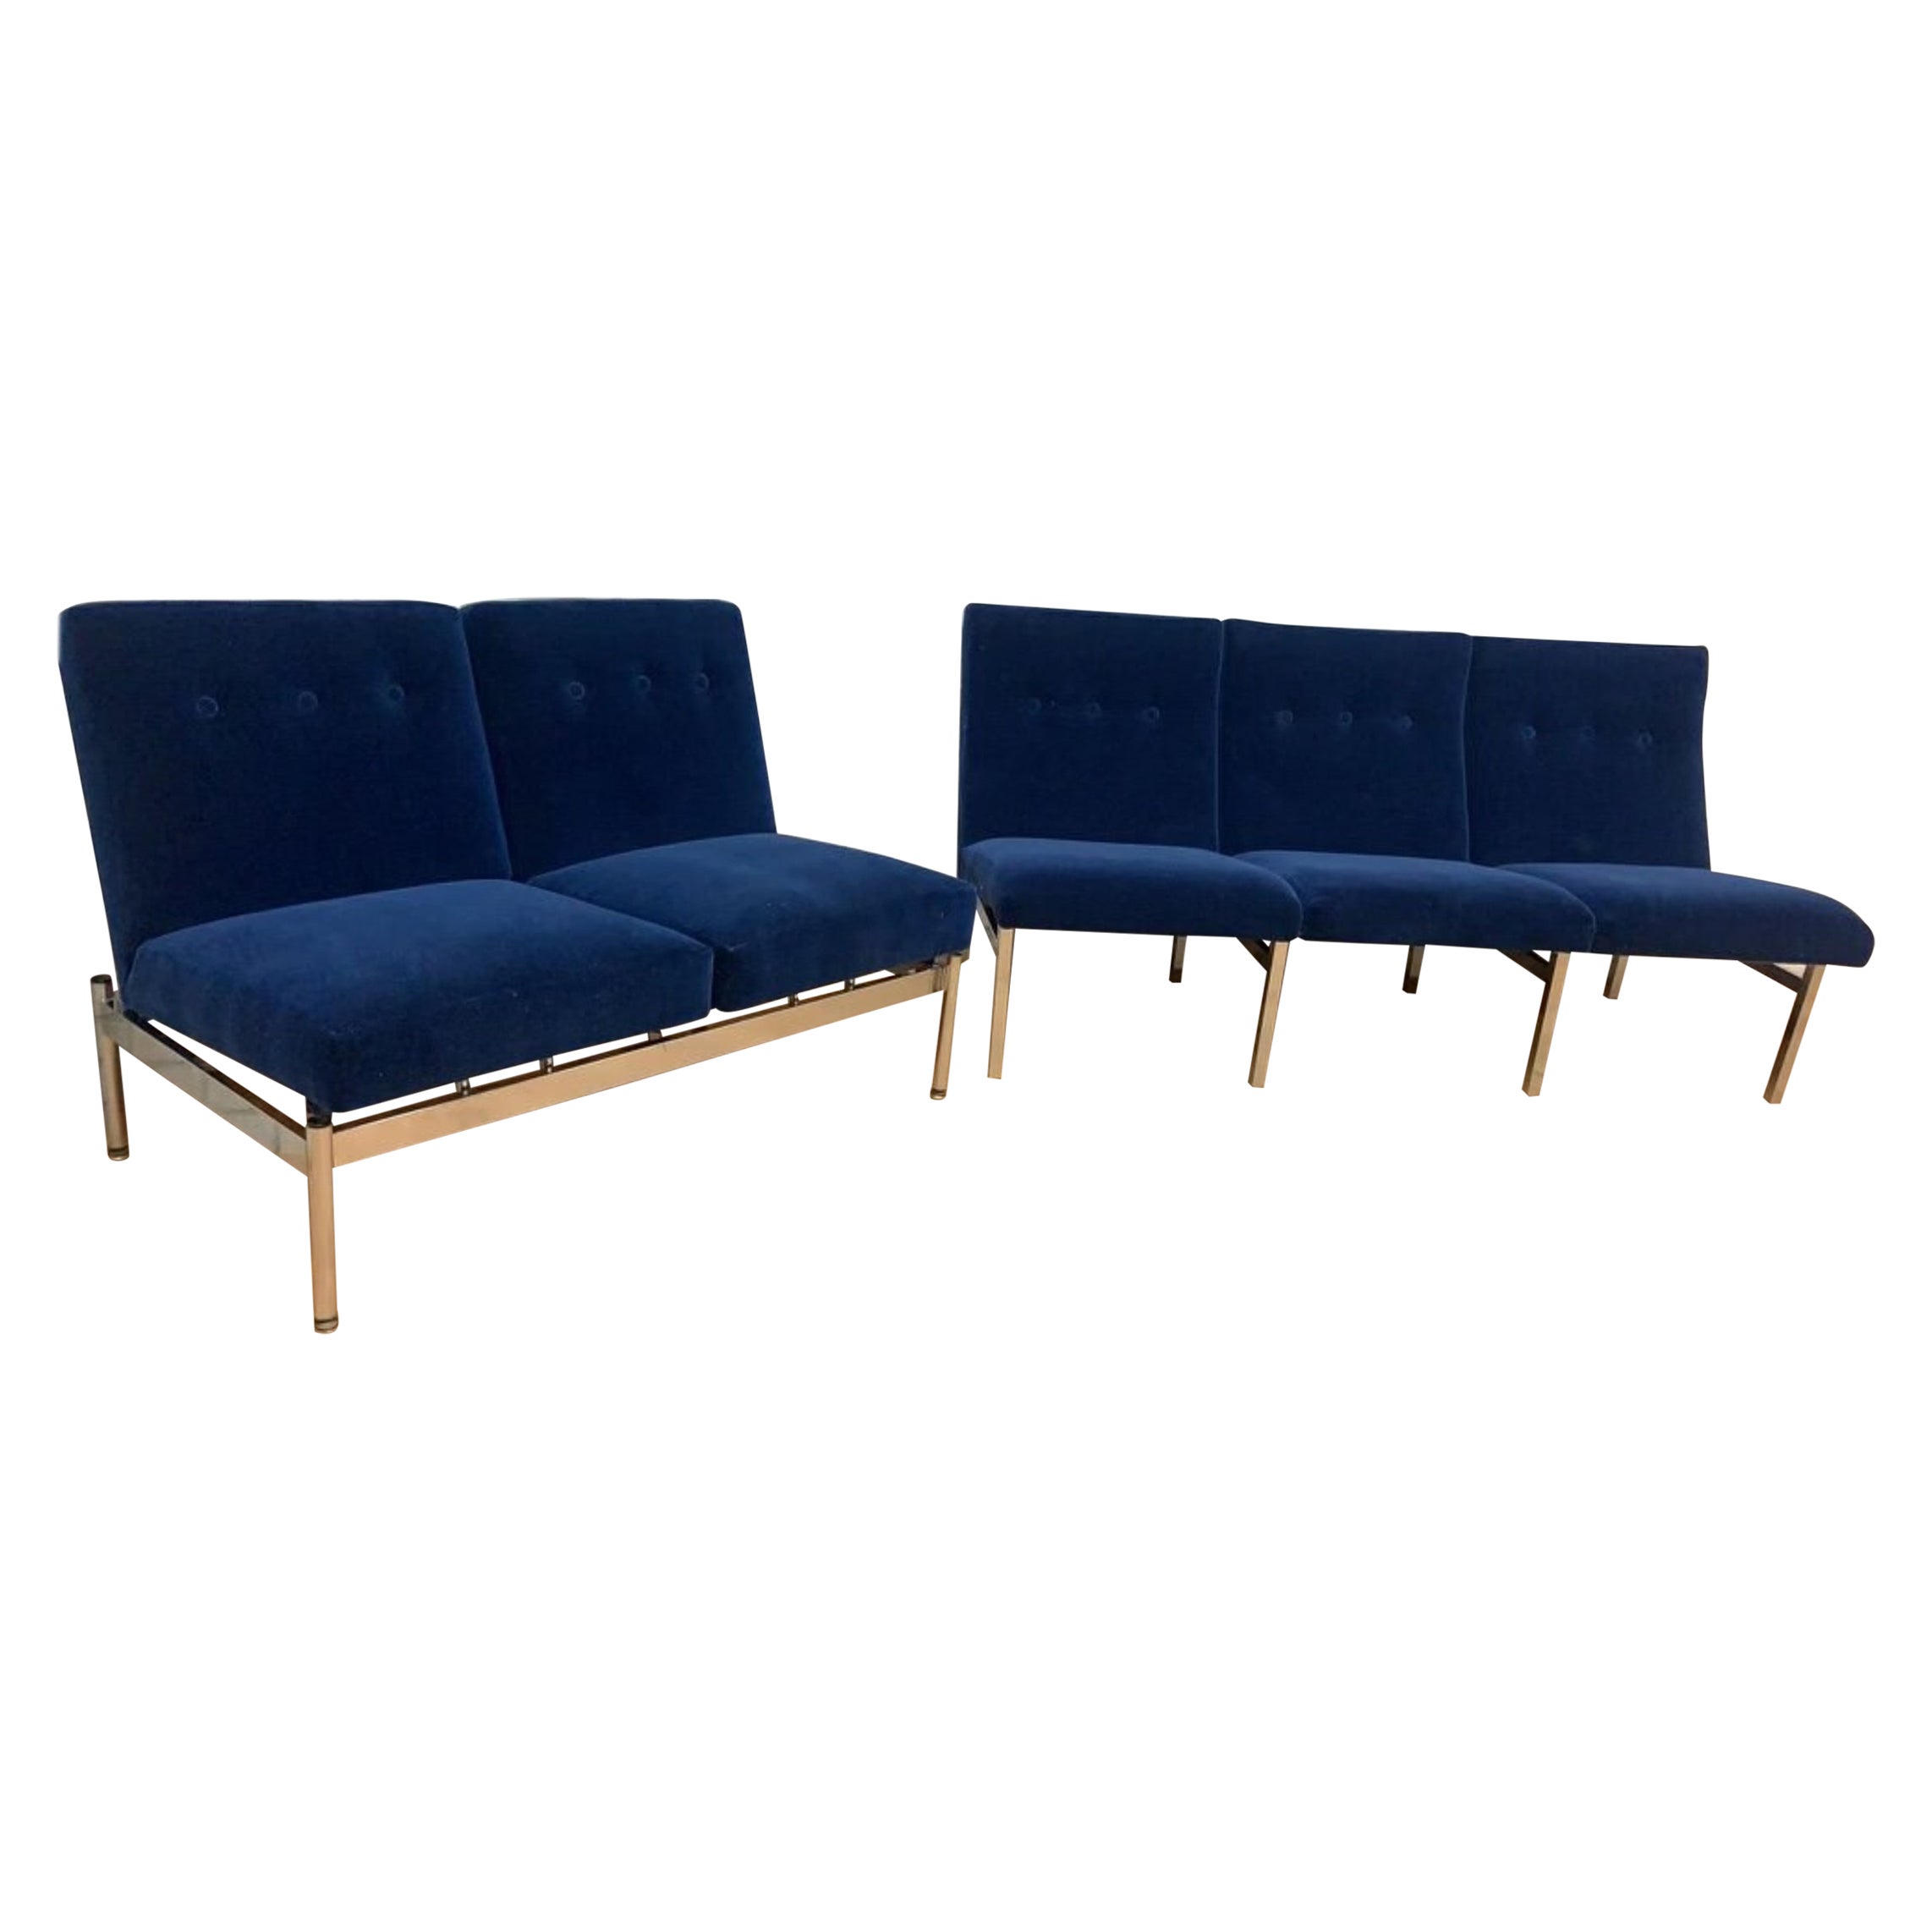 MCM Steelcase 3 Seat & 2 Seat Sofa Set Upholstered in “Cobalt Blue” - Set of 2 For Sale